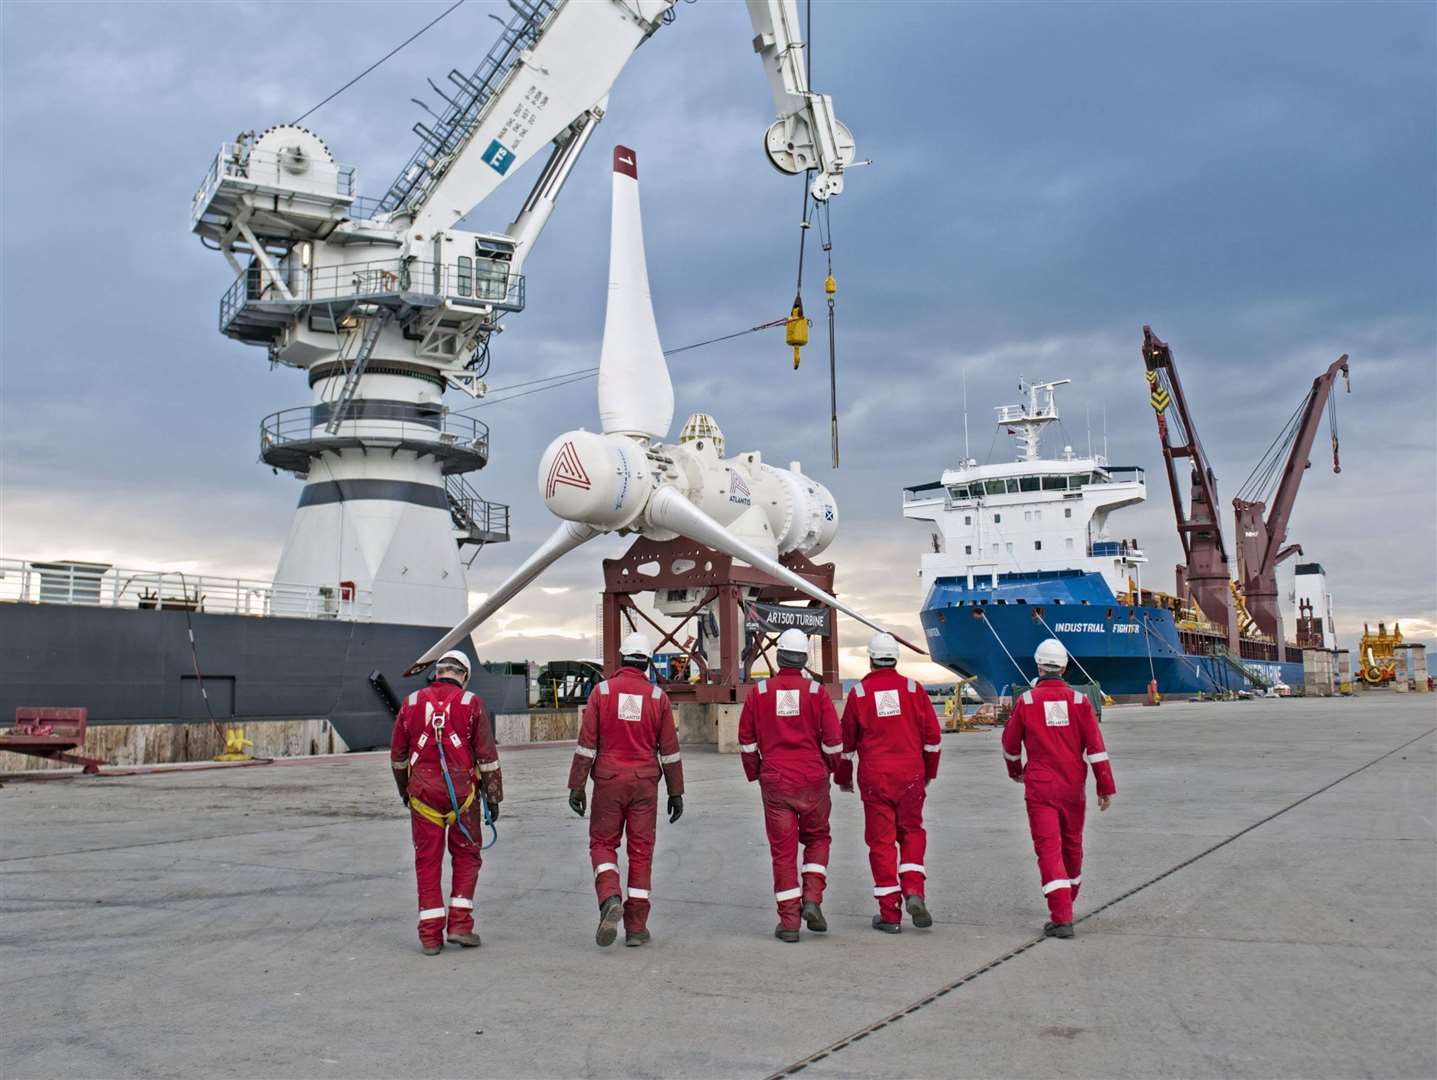 Tidal energy projects such as MeyGen need support from the UK Govt, says industry leaders.